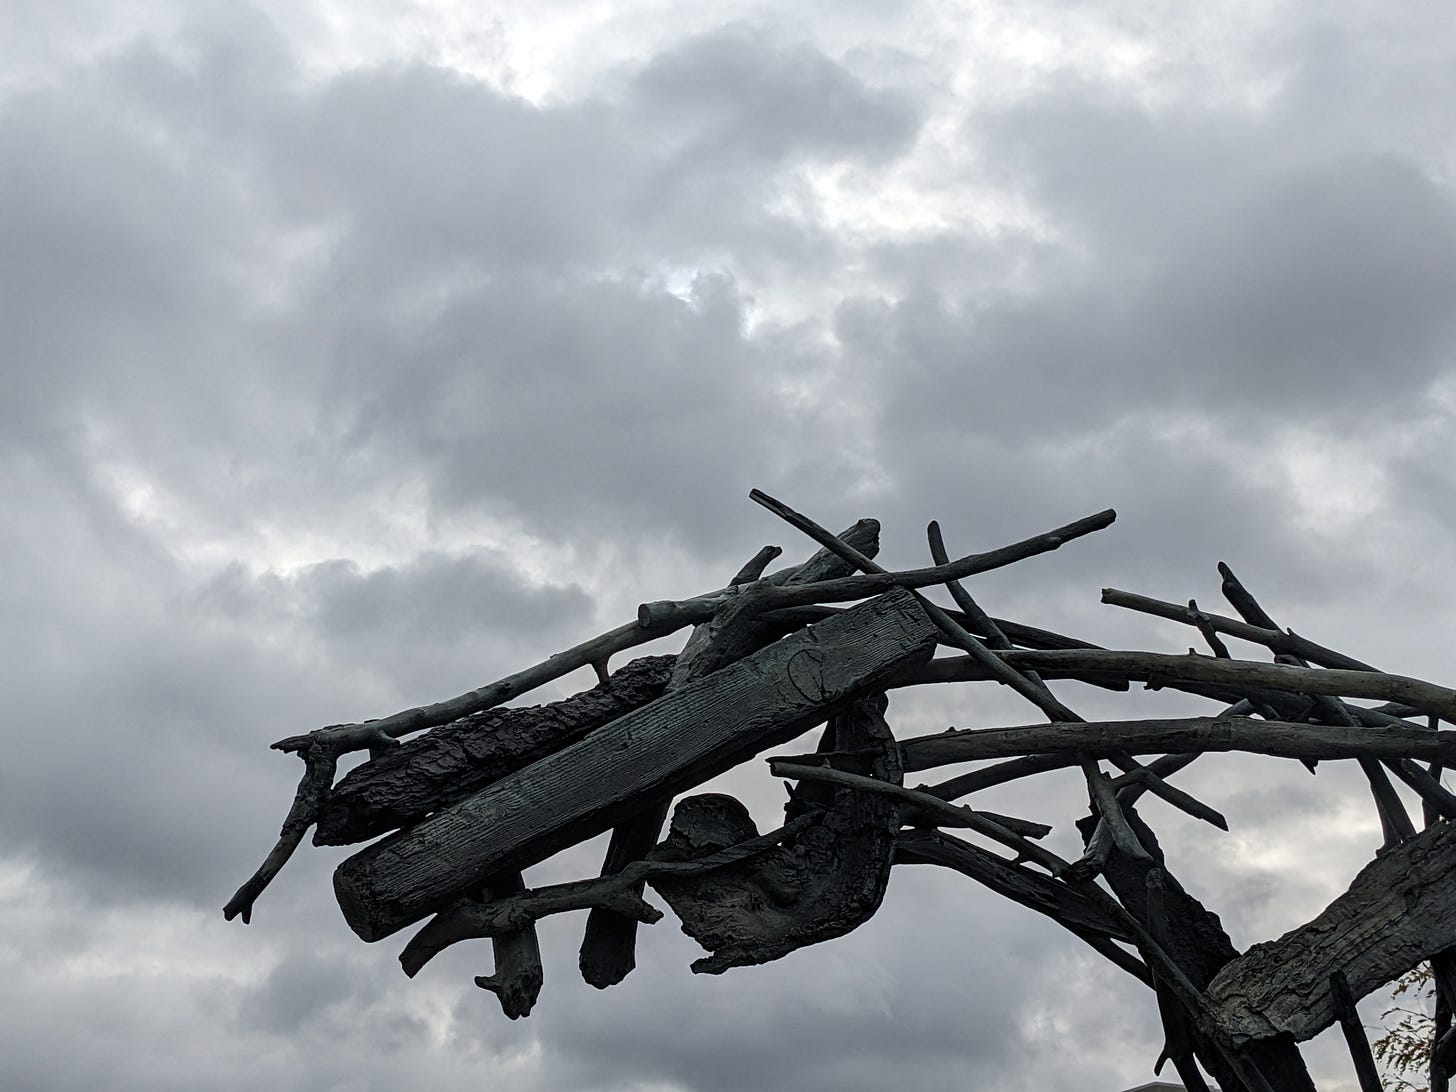 Photograph of a sculpture against a cloudy gray sky. The visible part of the sculpture is a horse head constructed from bronze twigs.